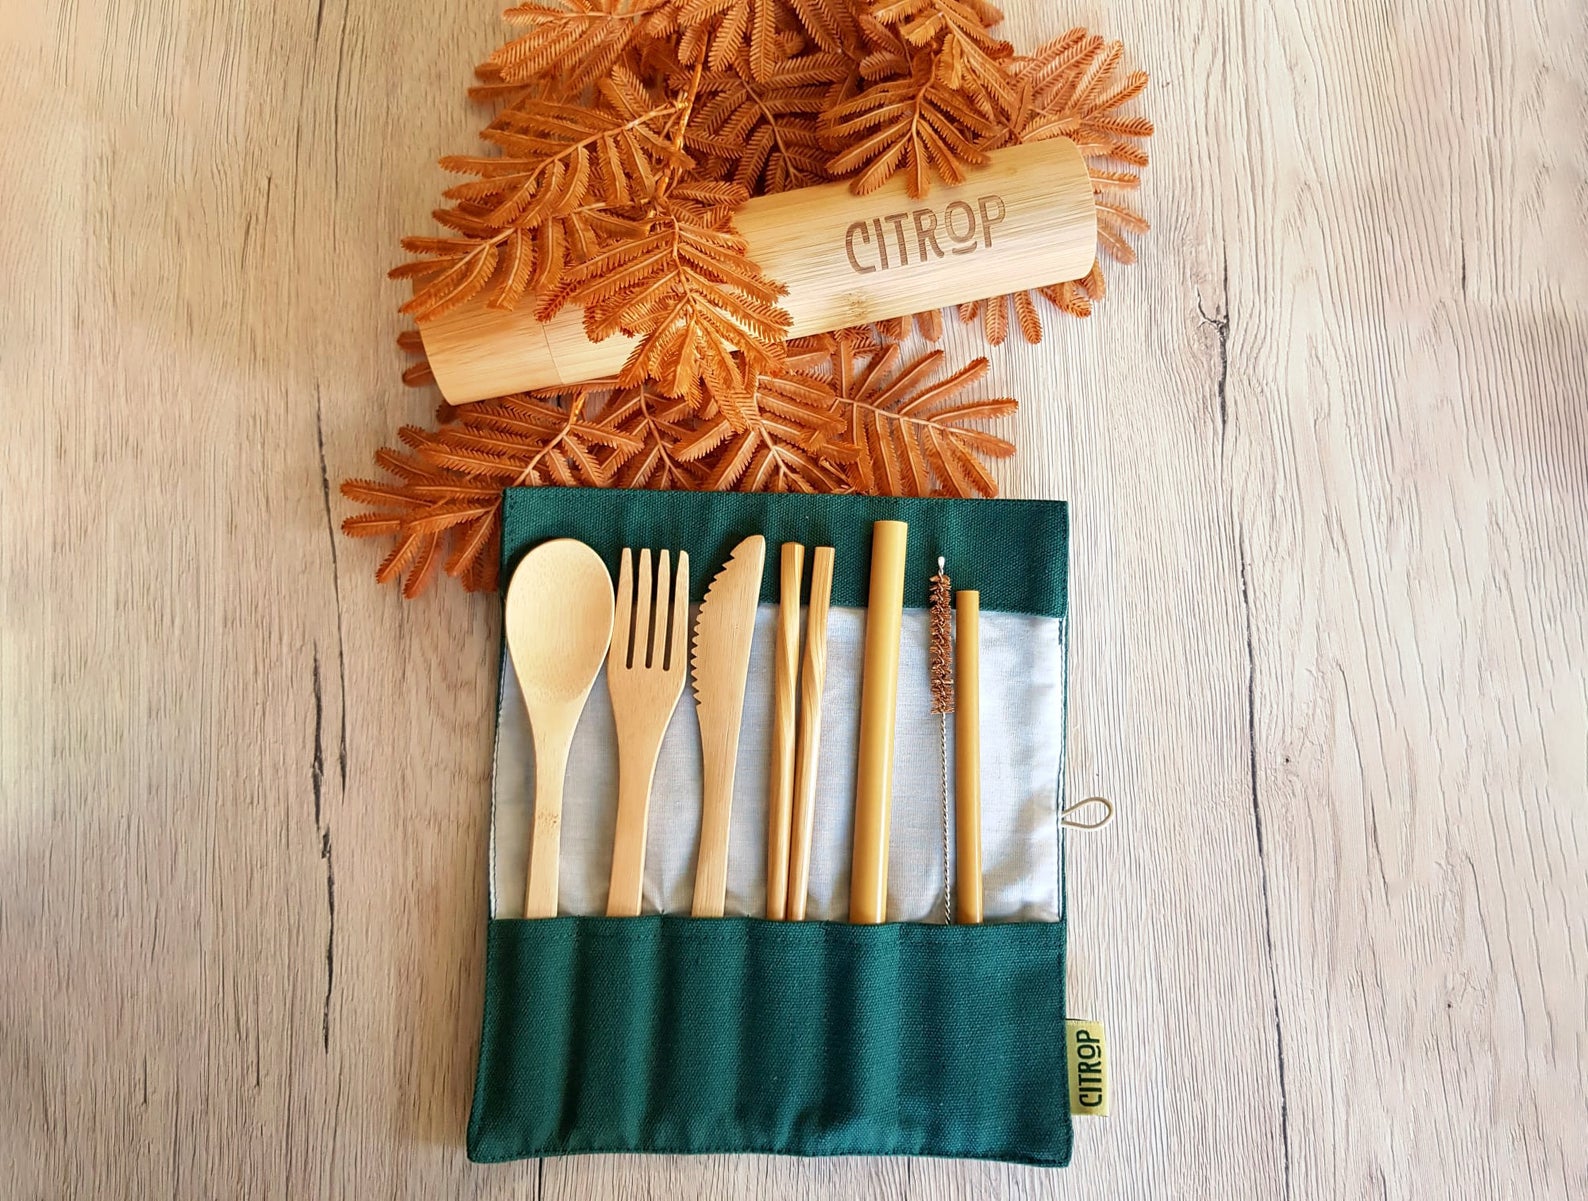 travel cutlery, silverware on the go, travel gifts, reusable cutlery for travel, gifts for flight attendants, gifts for eco-conscious travelers